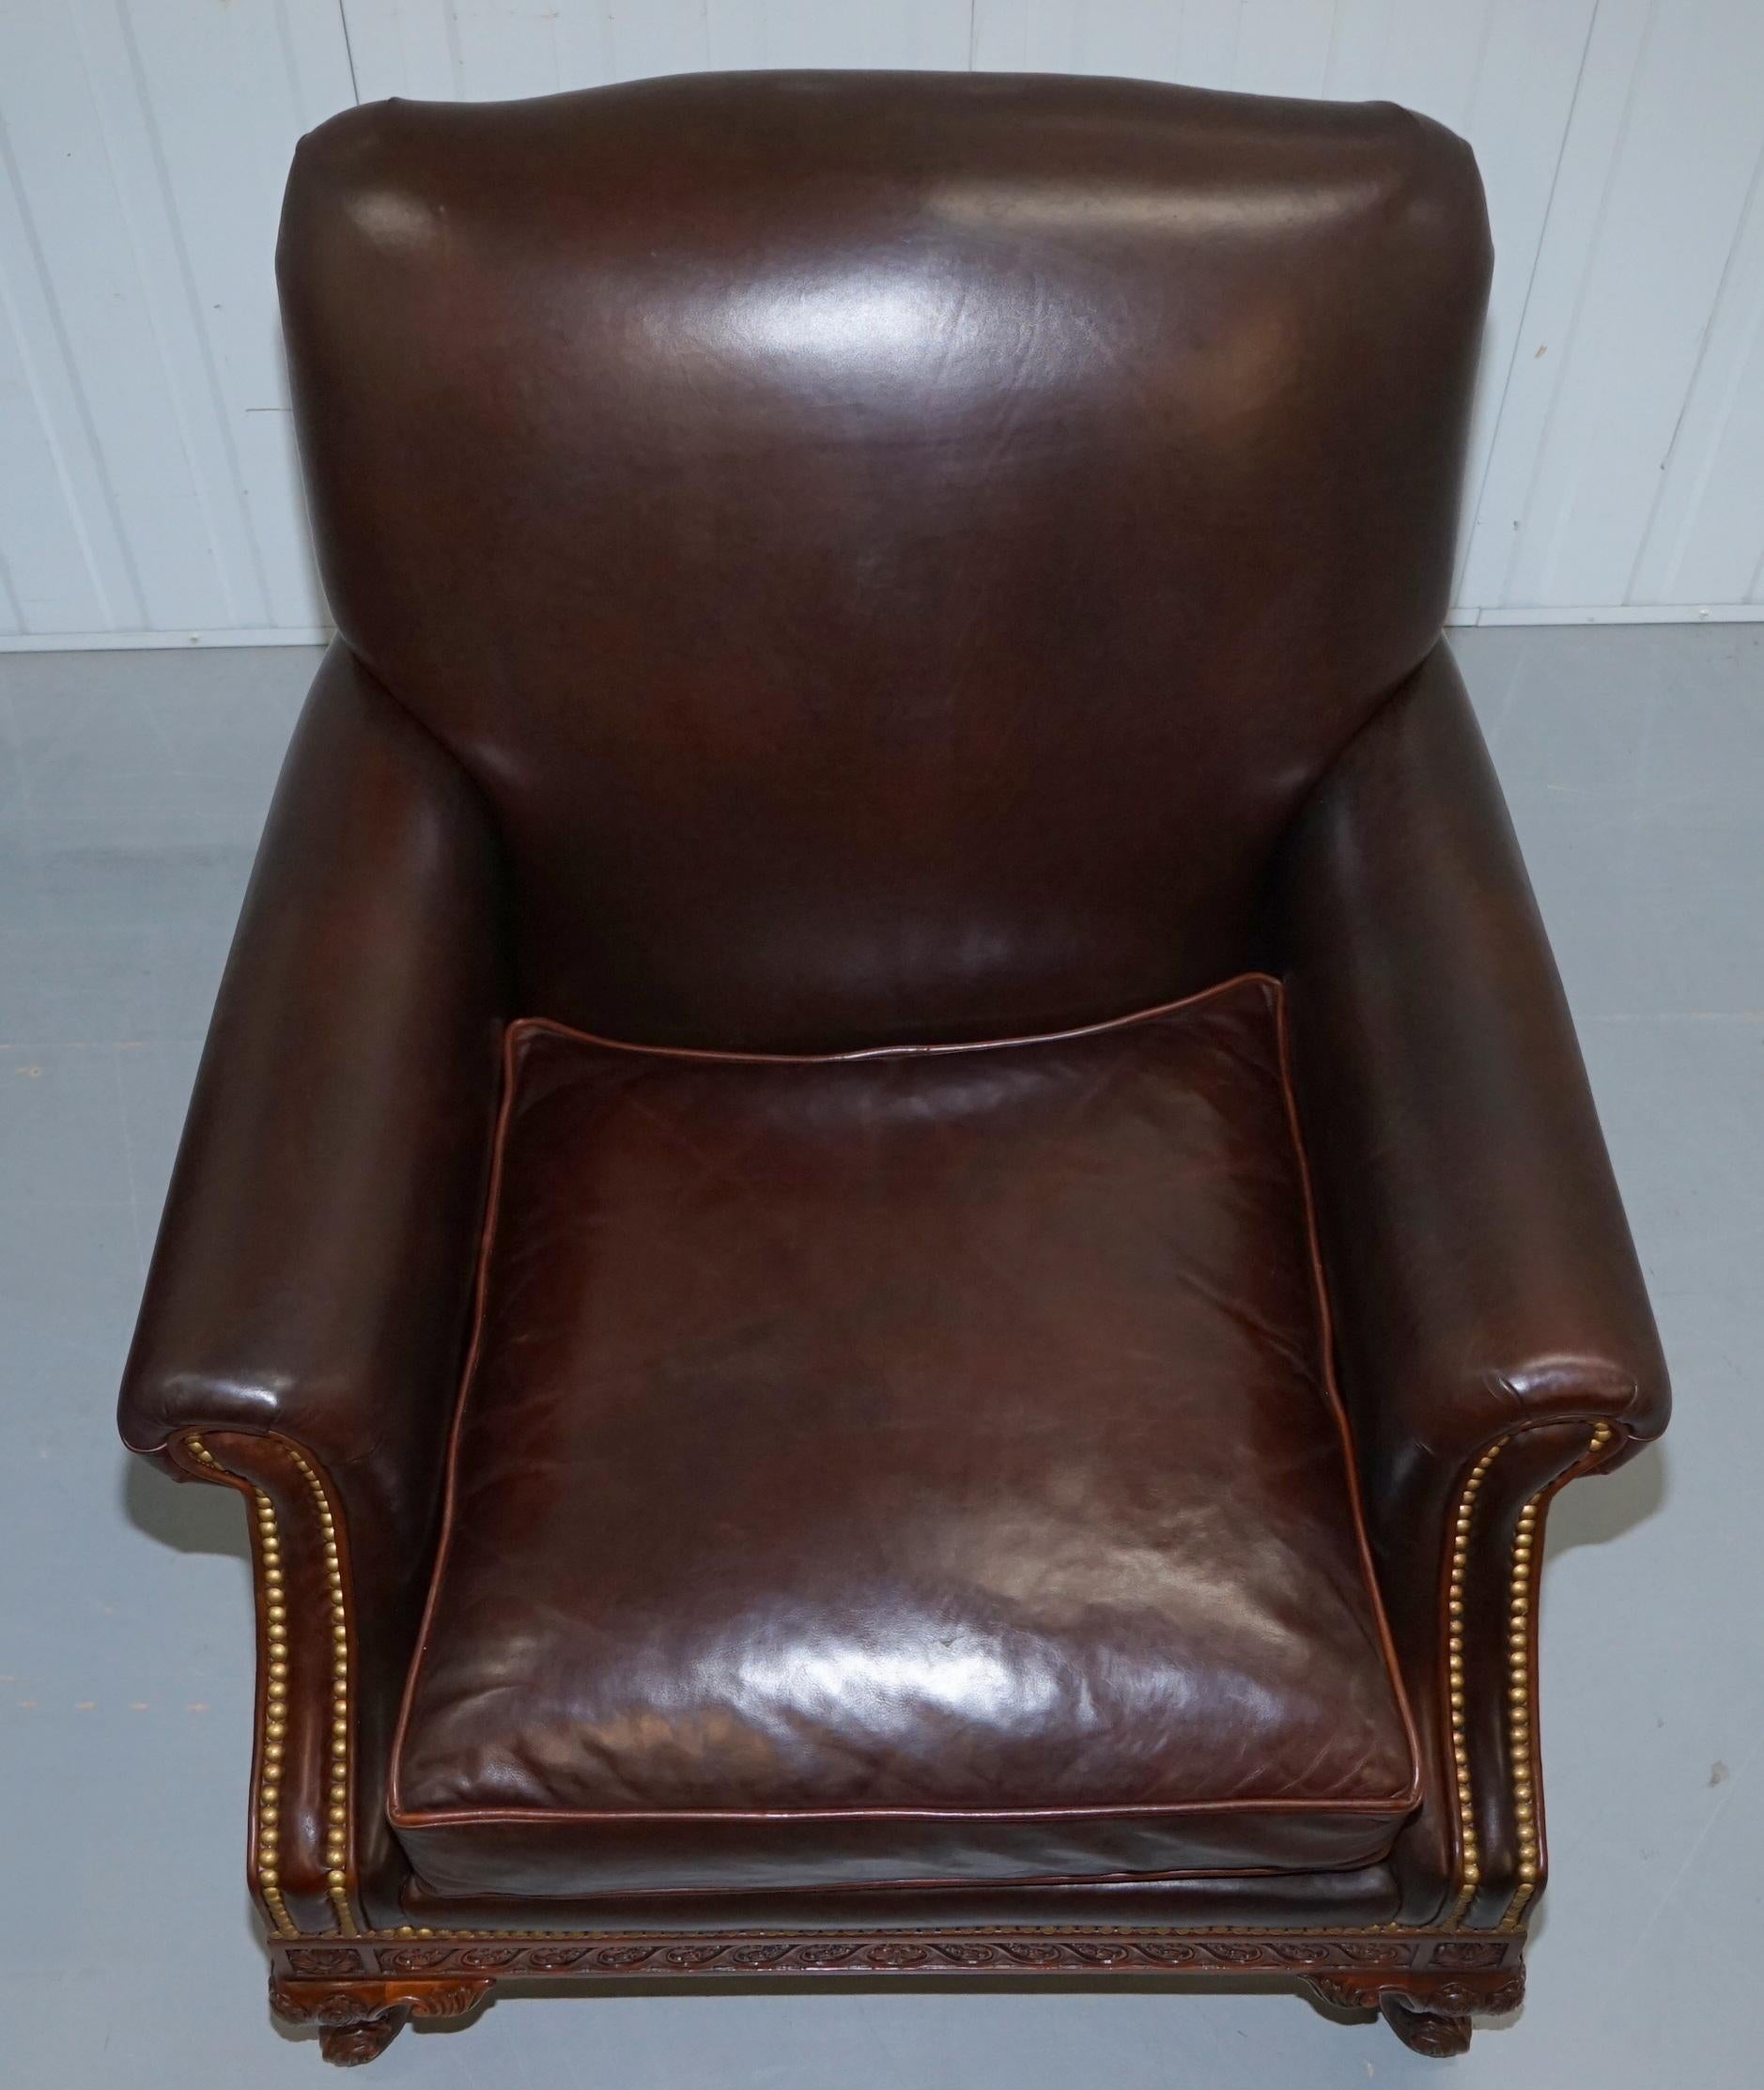 British Rare Pair of Althorp Estate Leather Armchairs Princess Diana's Family Home